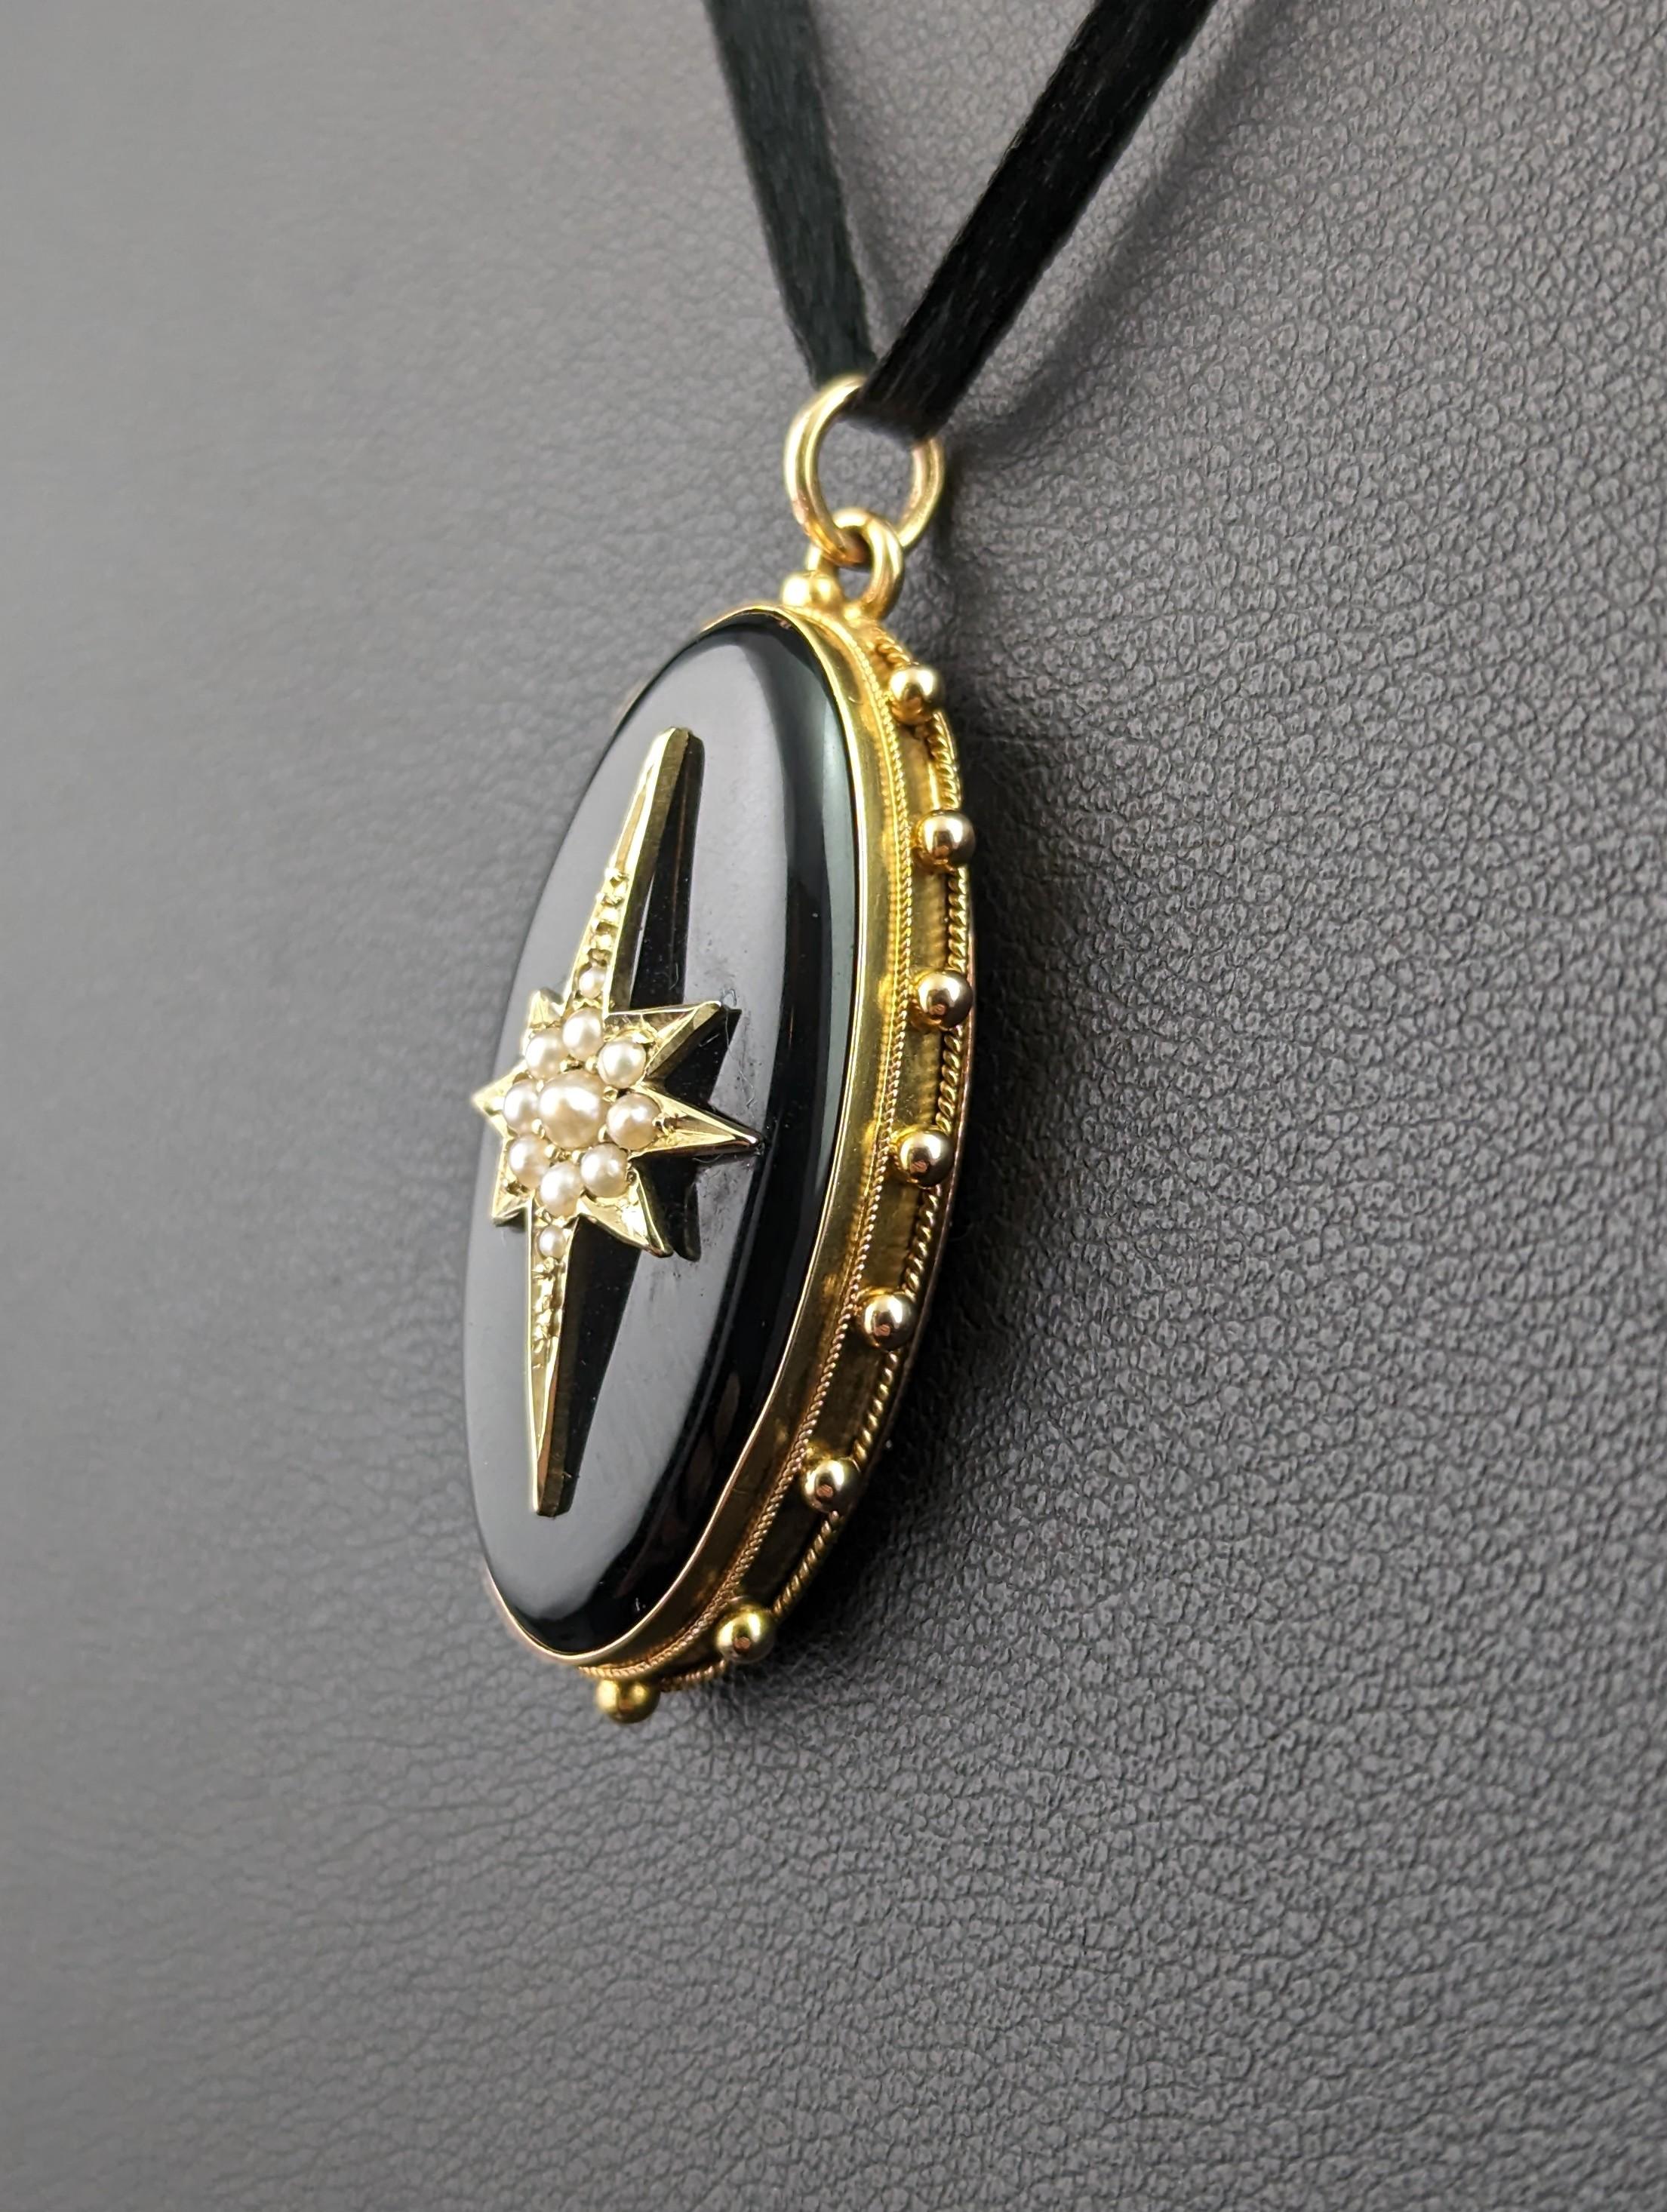 Cabochon Antique Onyx and Pearl Mourning Locket, Star, 9k Gold